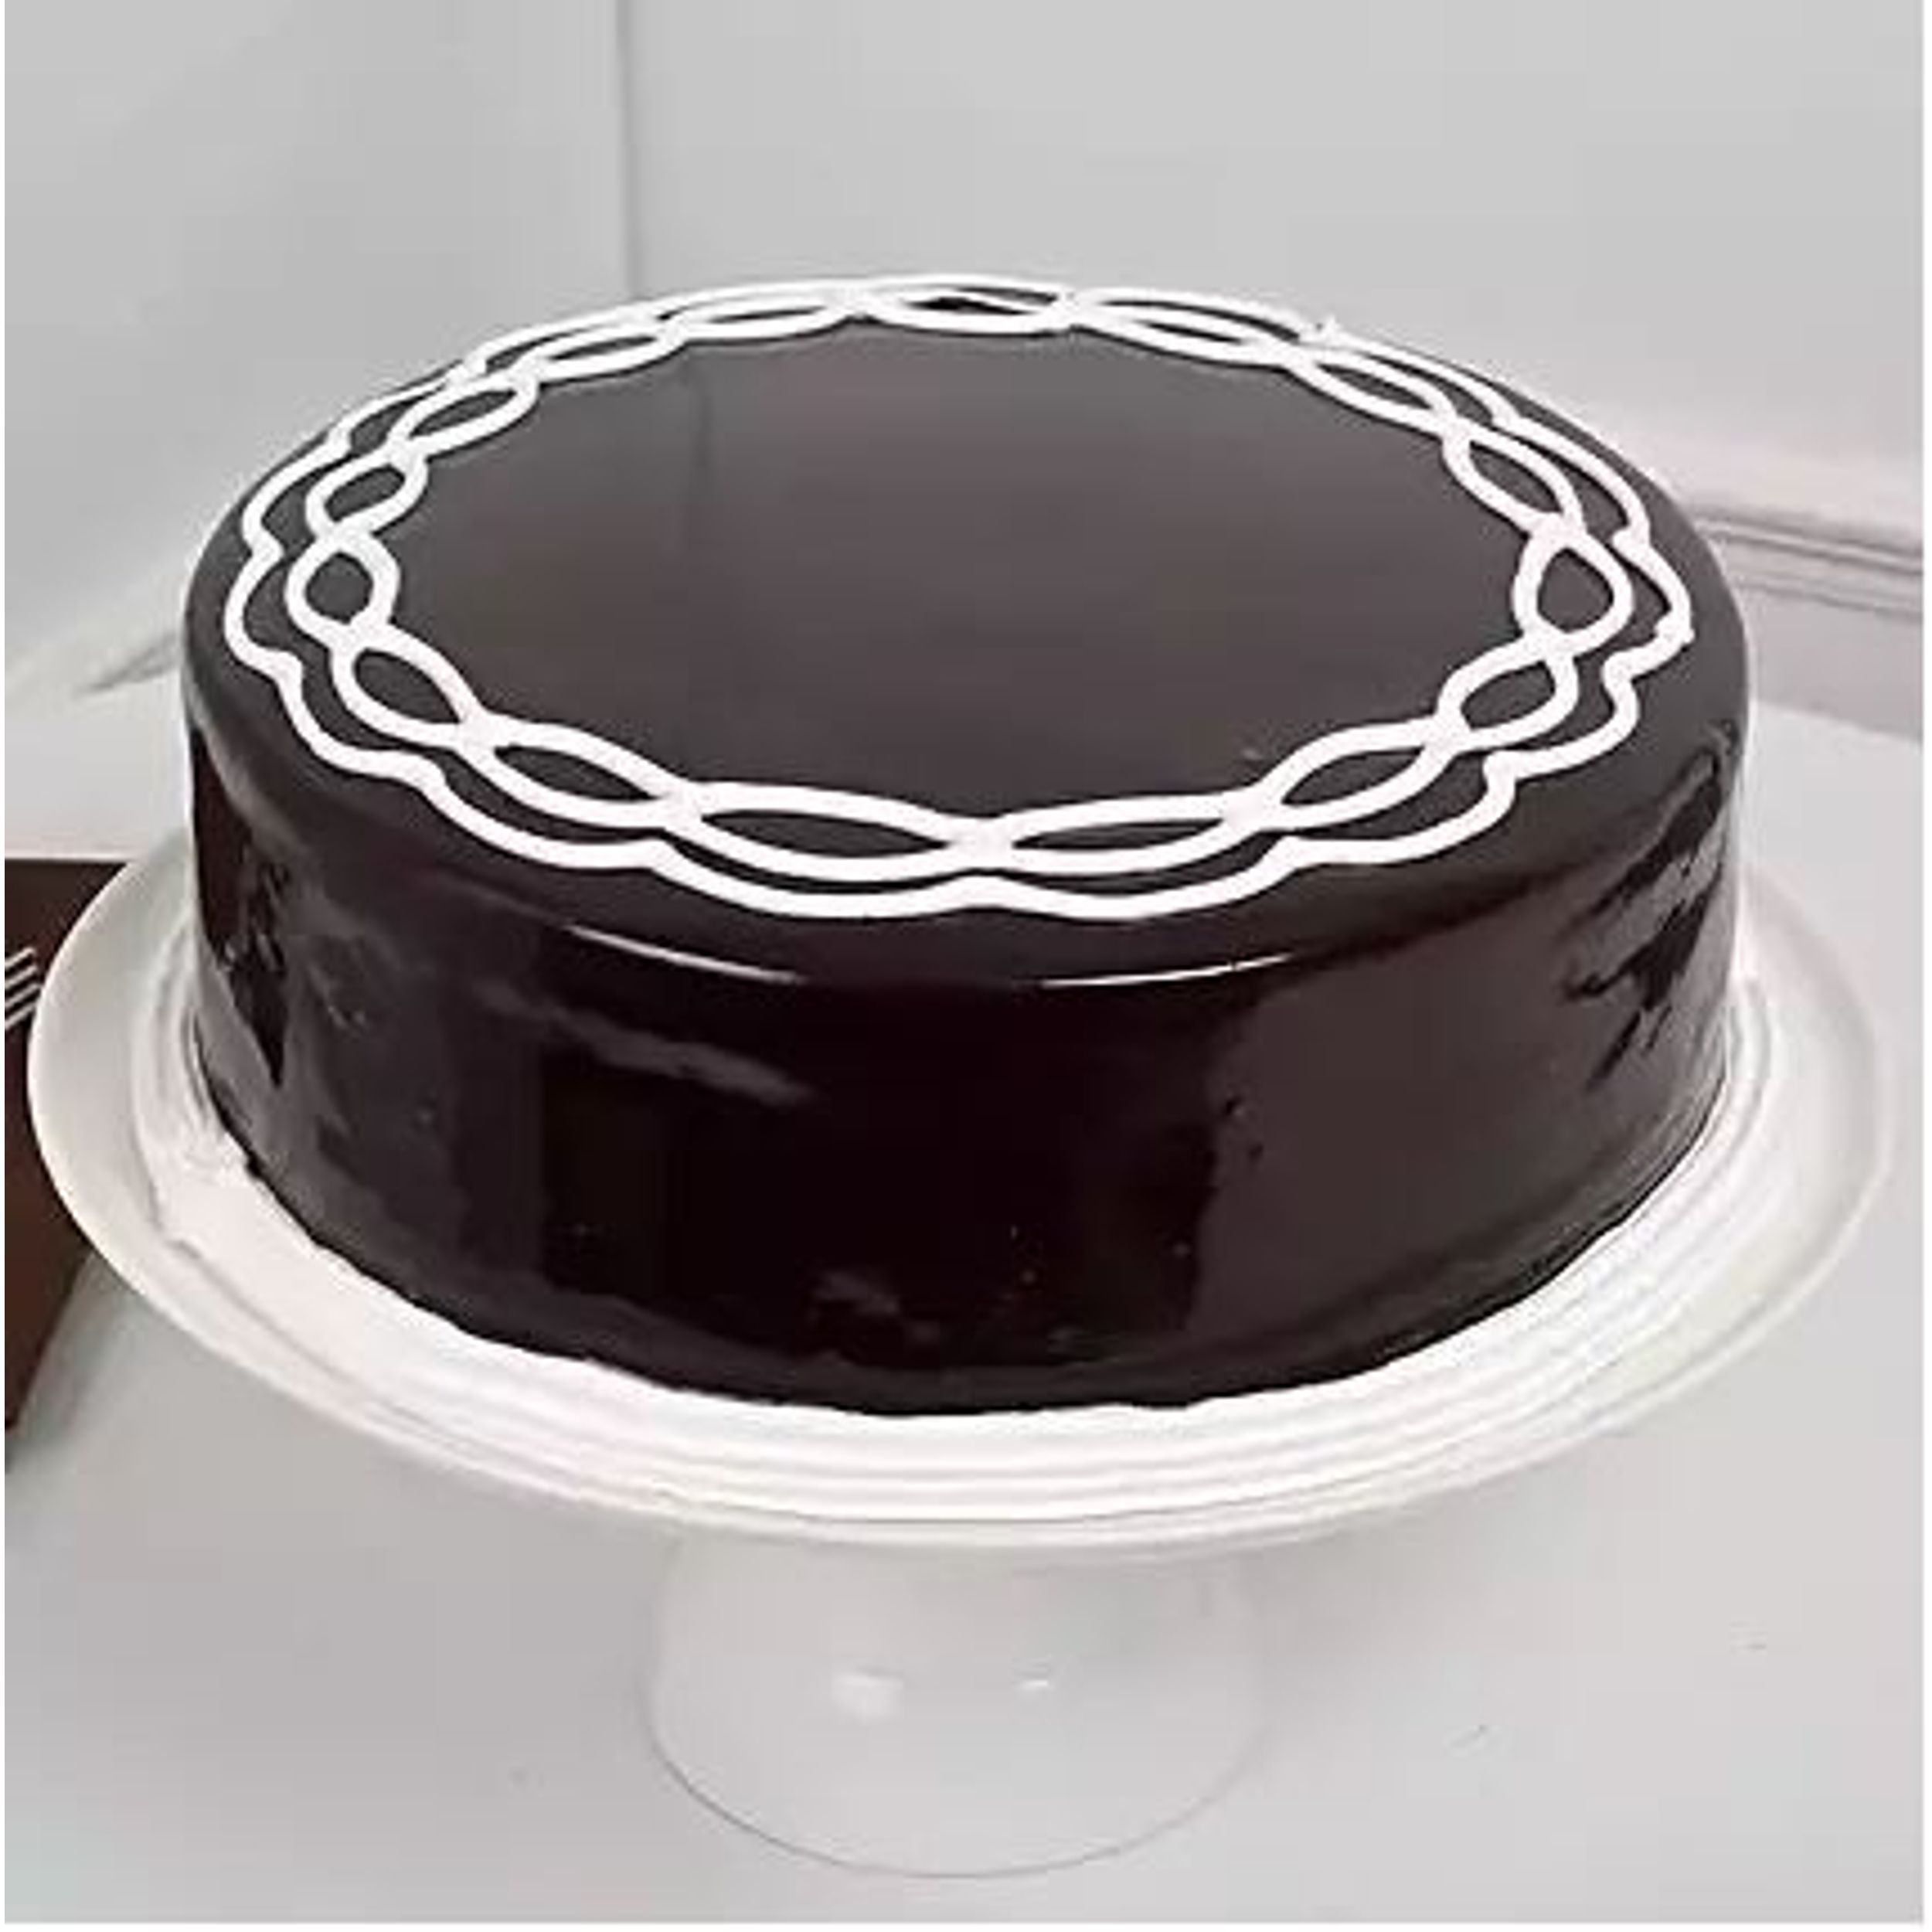 Online Vanilla Cake Delivery in Pune - MyFlowerTree